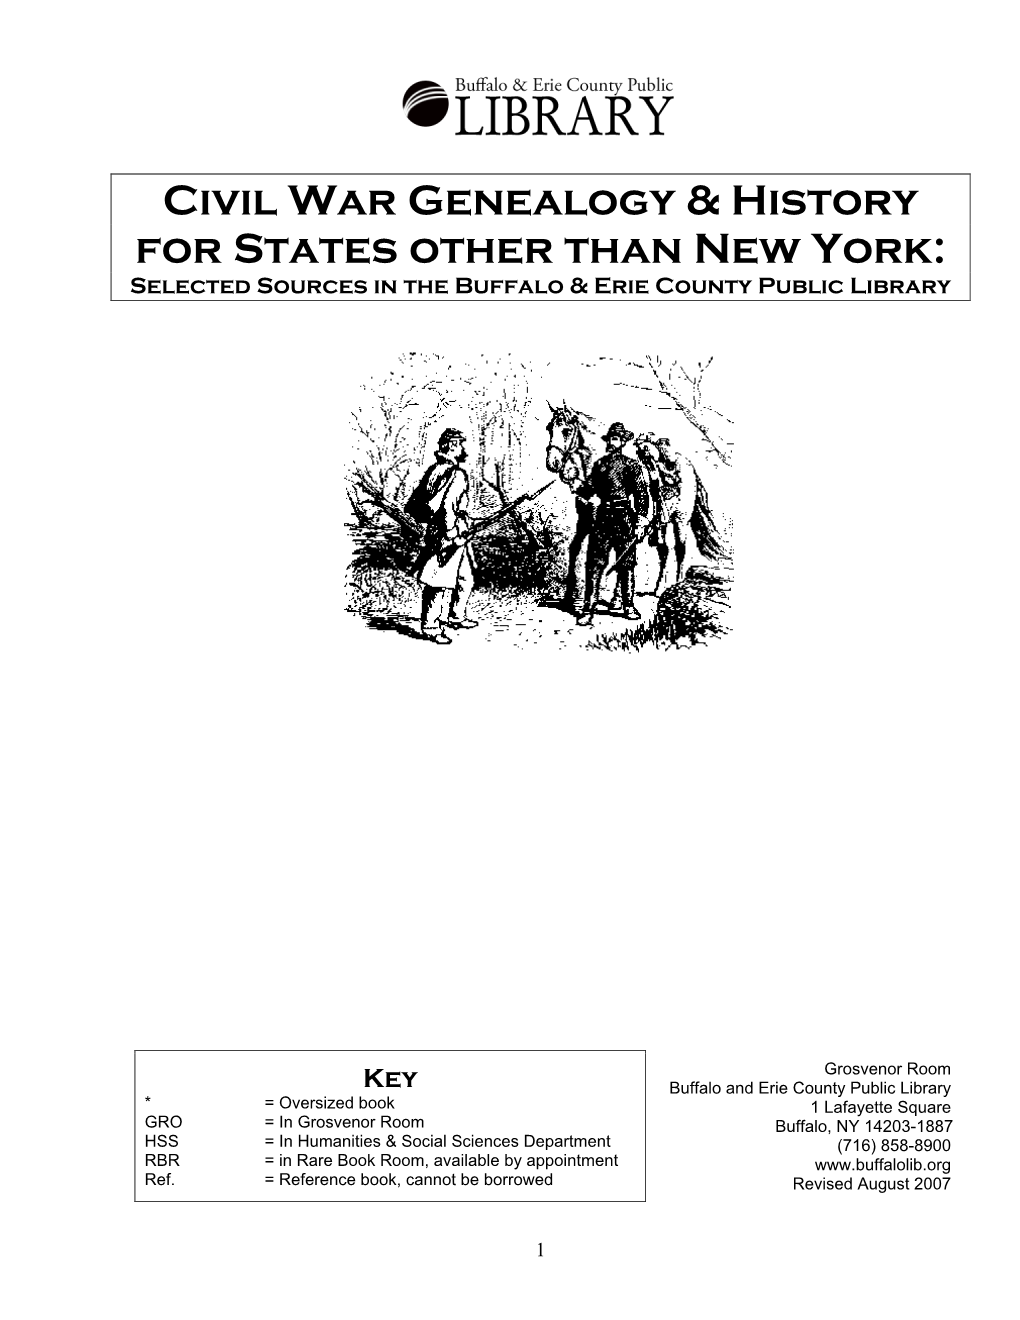 Civil War Resources for States Other Than New York